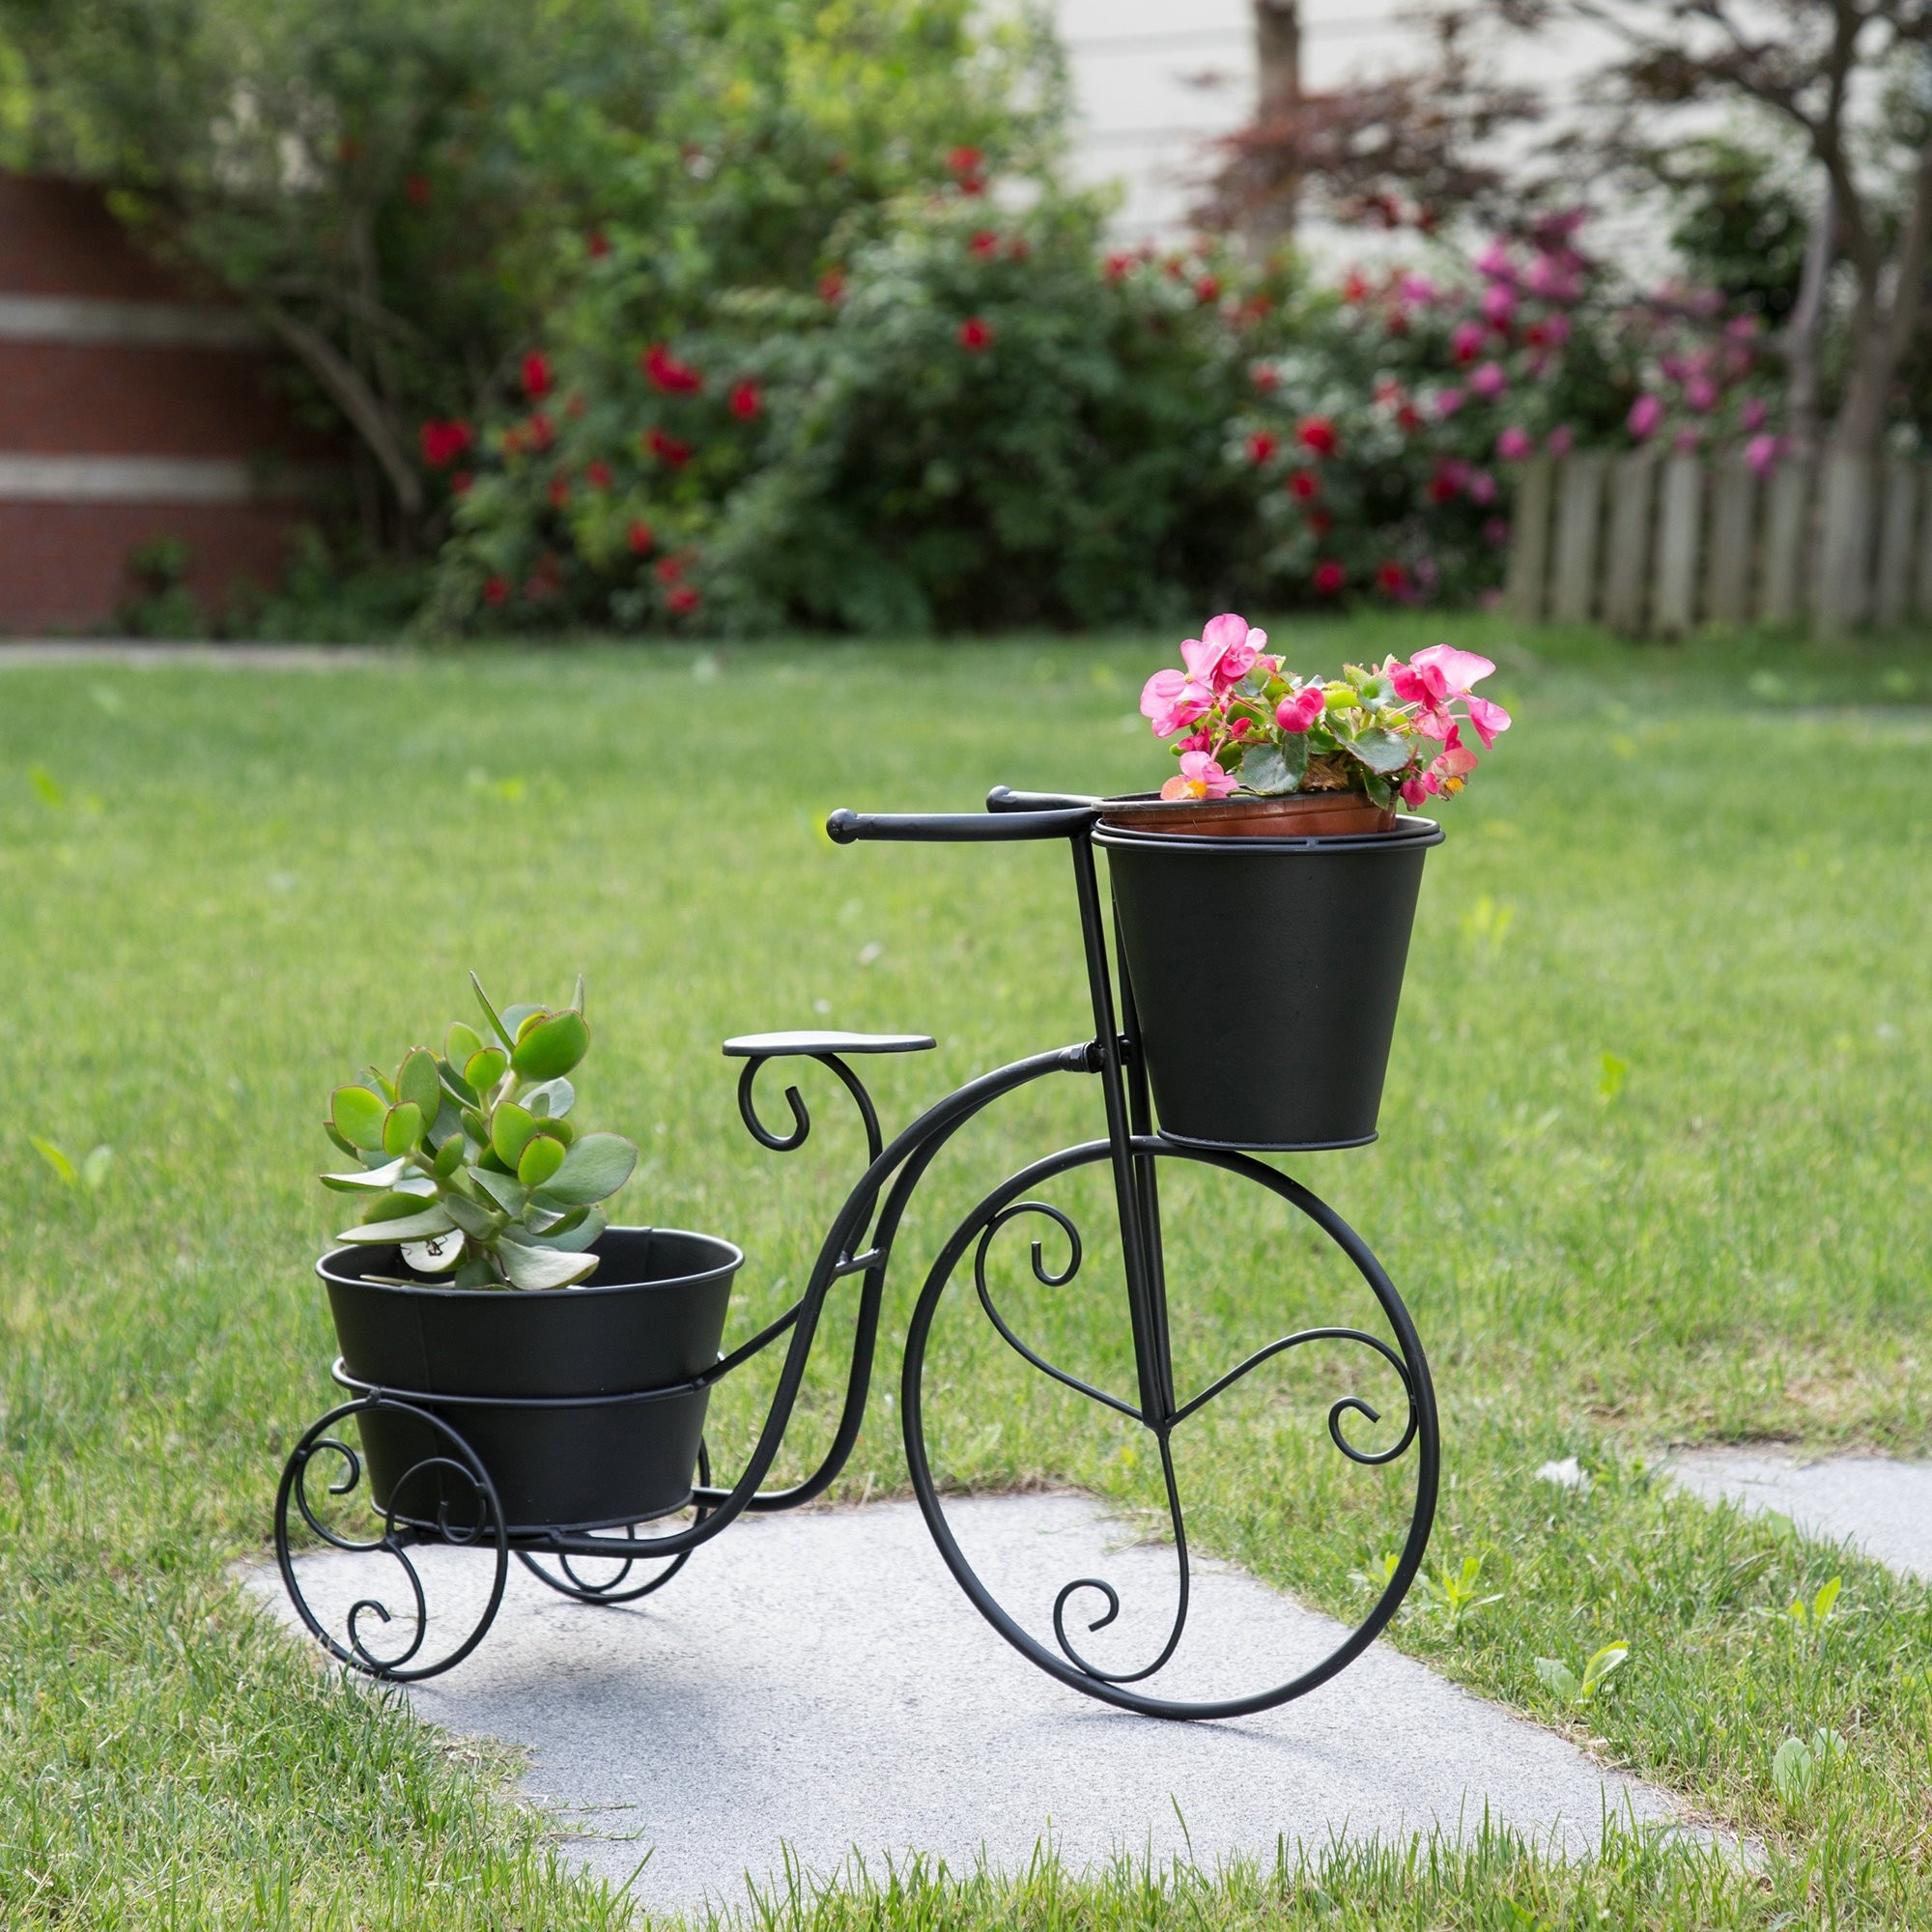 METAL SHABBY CHIC/COTTAGE STYLE BICYCLE PLANTER STAND 13" by 9" by 6"  